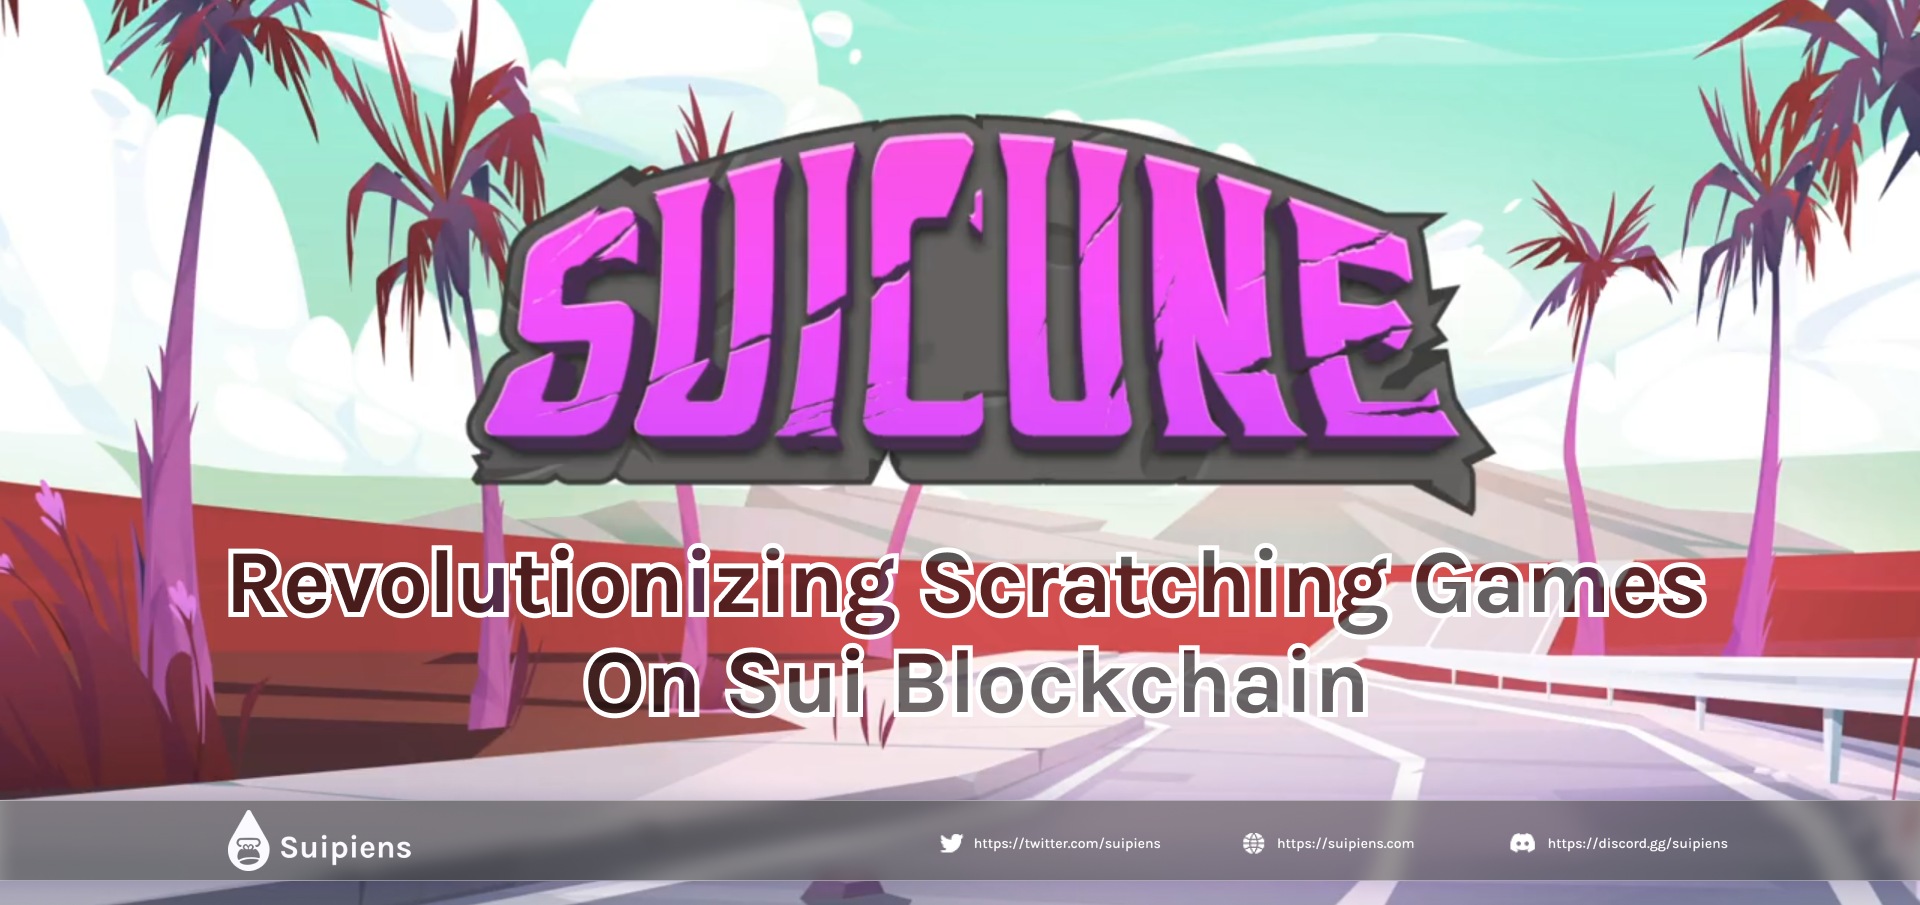 Suicune: Revolutionizing Scratching Games on Sui Blockchain